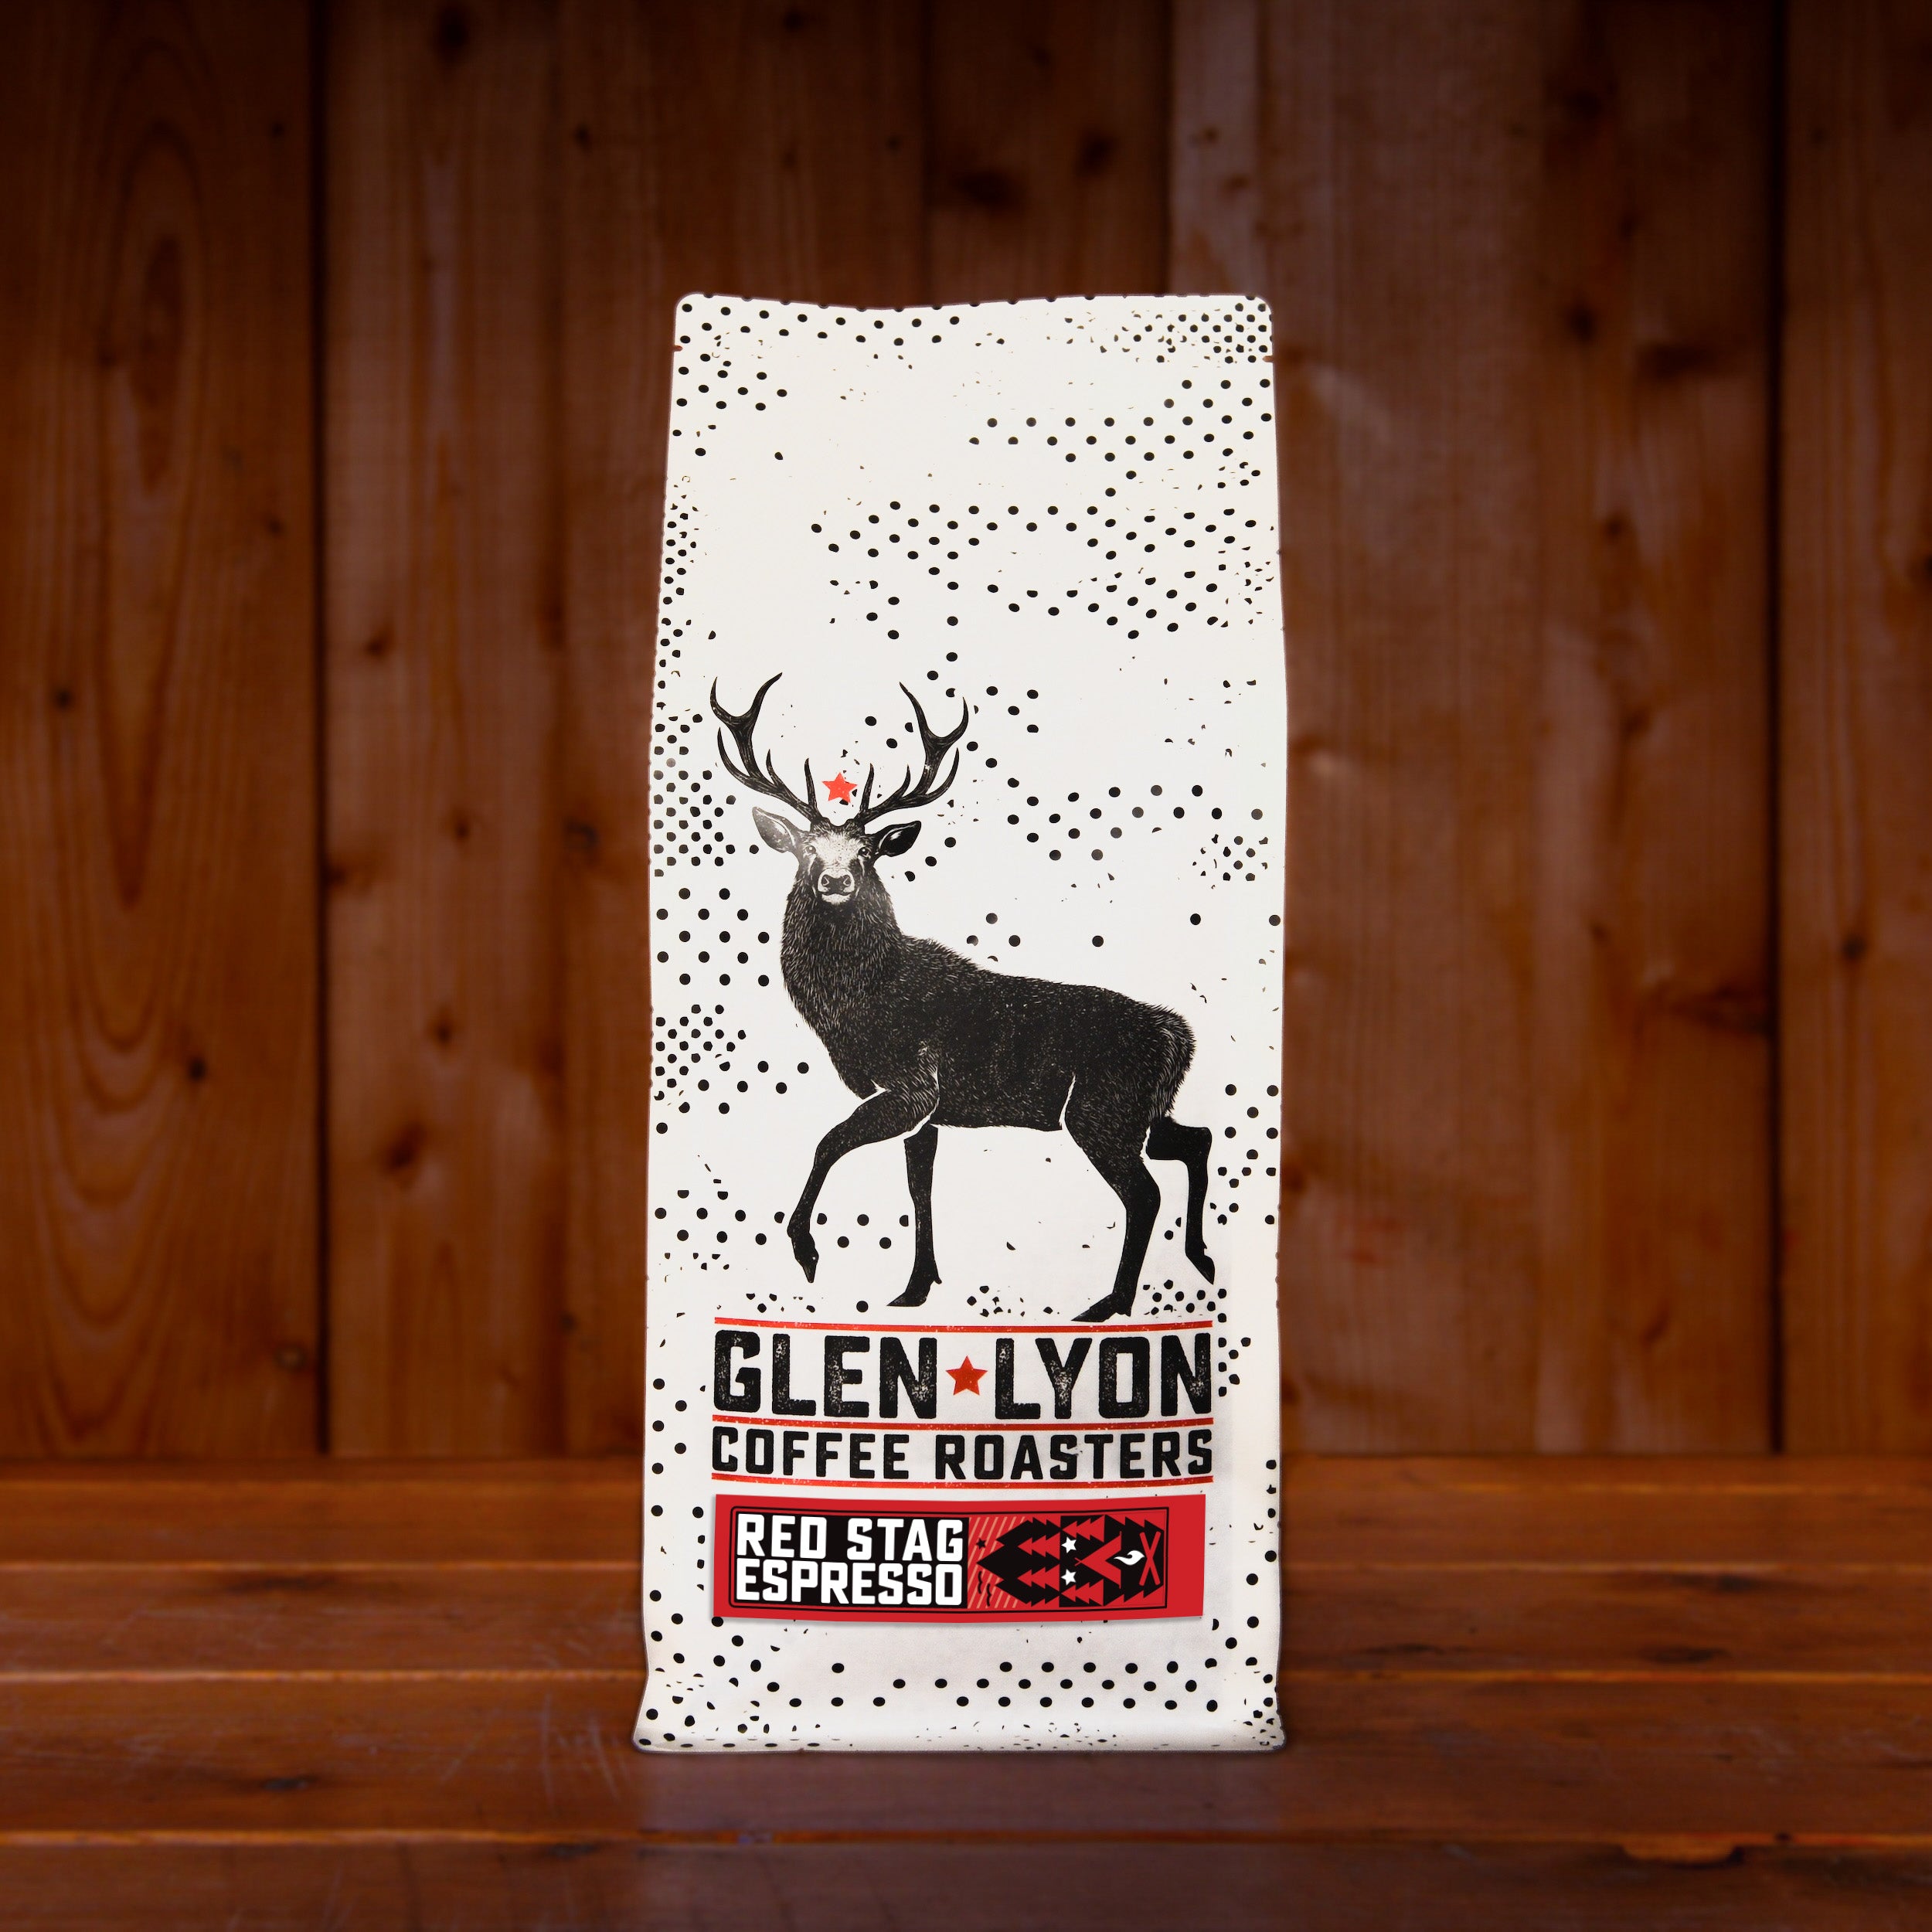 A 1kg bag of Glen Lyon Coffee Roasters' Red Stag Espresso speciality coffee sitting on a wooden table